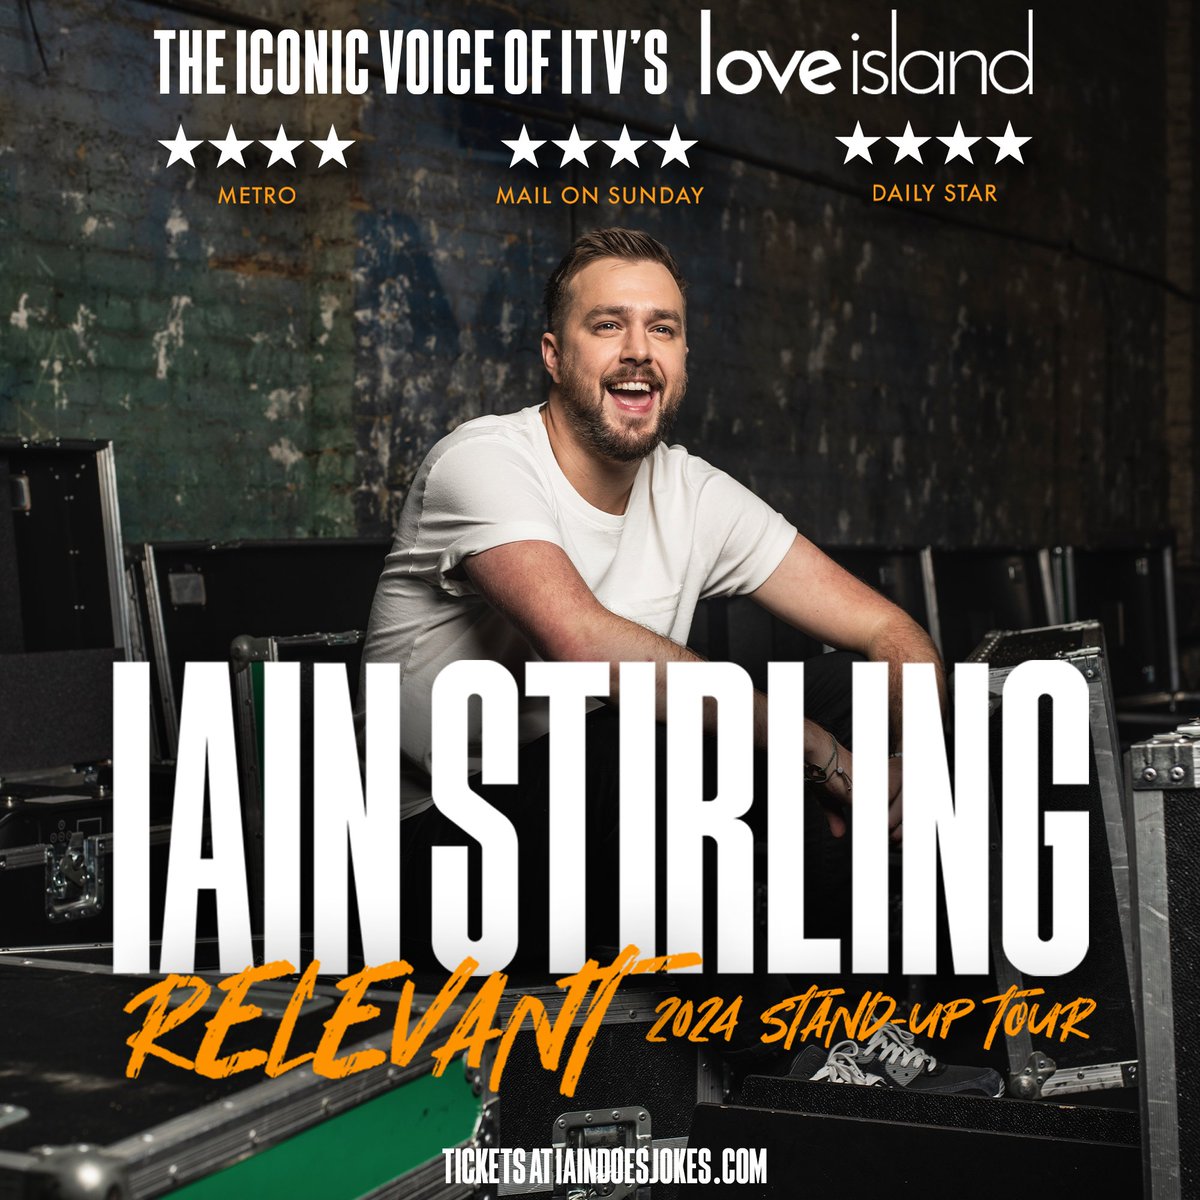 There is just one week to go until we are joined by the iconic voice of Love Island, Ian Stirling for his Relevant tour! 🤣 He will be bringing his intuitive razor-sharp humour back for this brand new stand-up show. Book your tickets now 🎟 - bit.ly/3mRhtPj